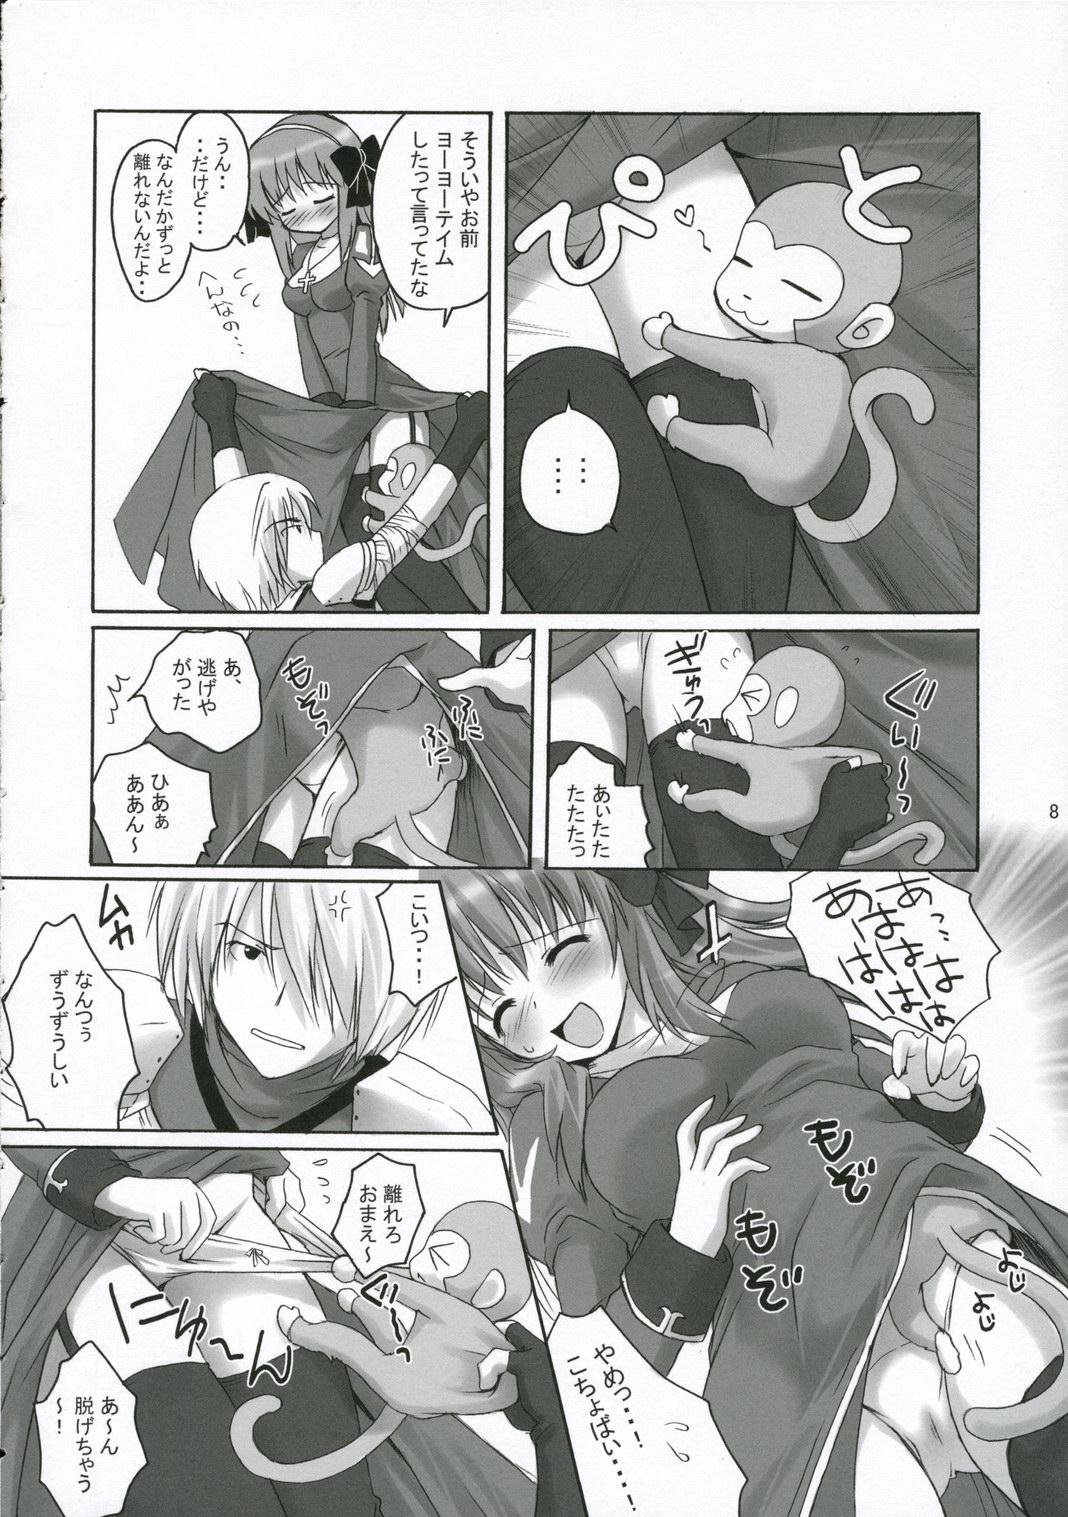 Ejaculation PUCHI and PUCHI - Ragnarok online Russia - Page 7